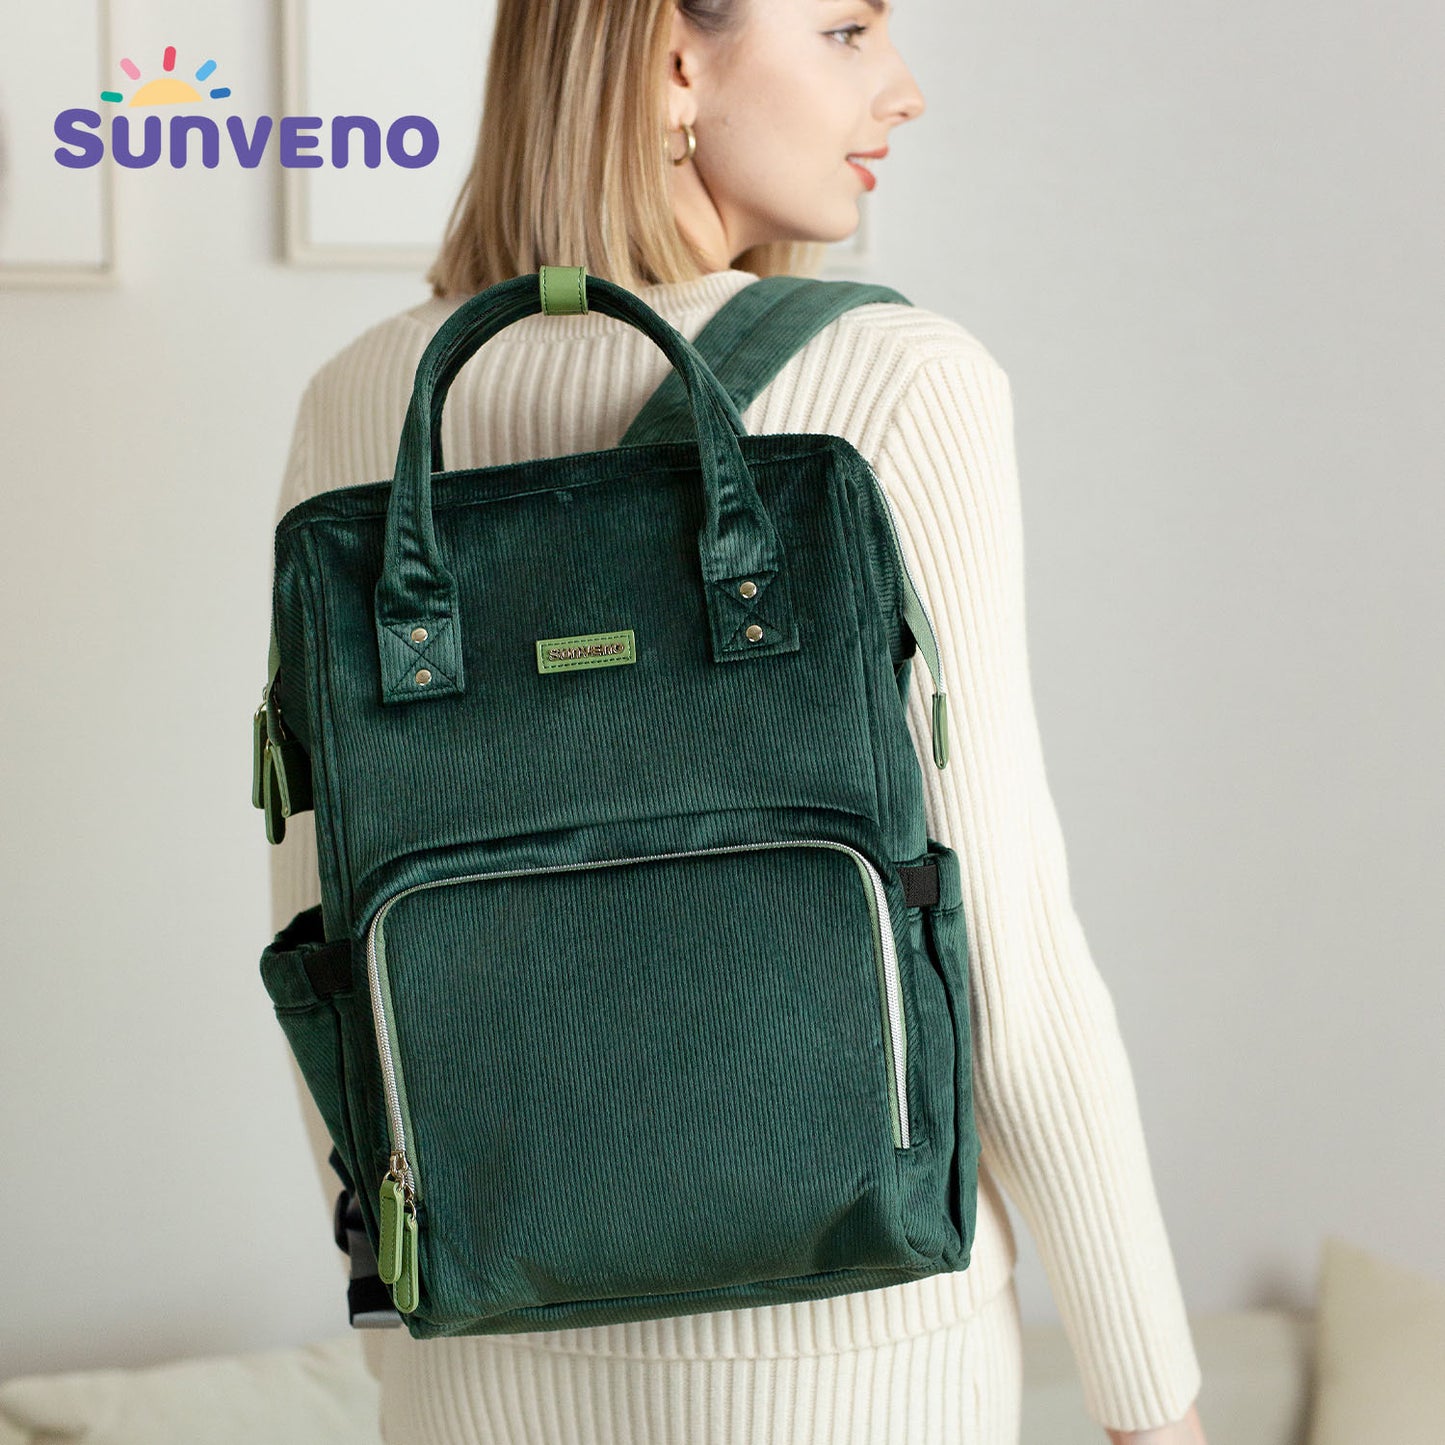 Personalized Corduroy Diaper Backpack